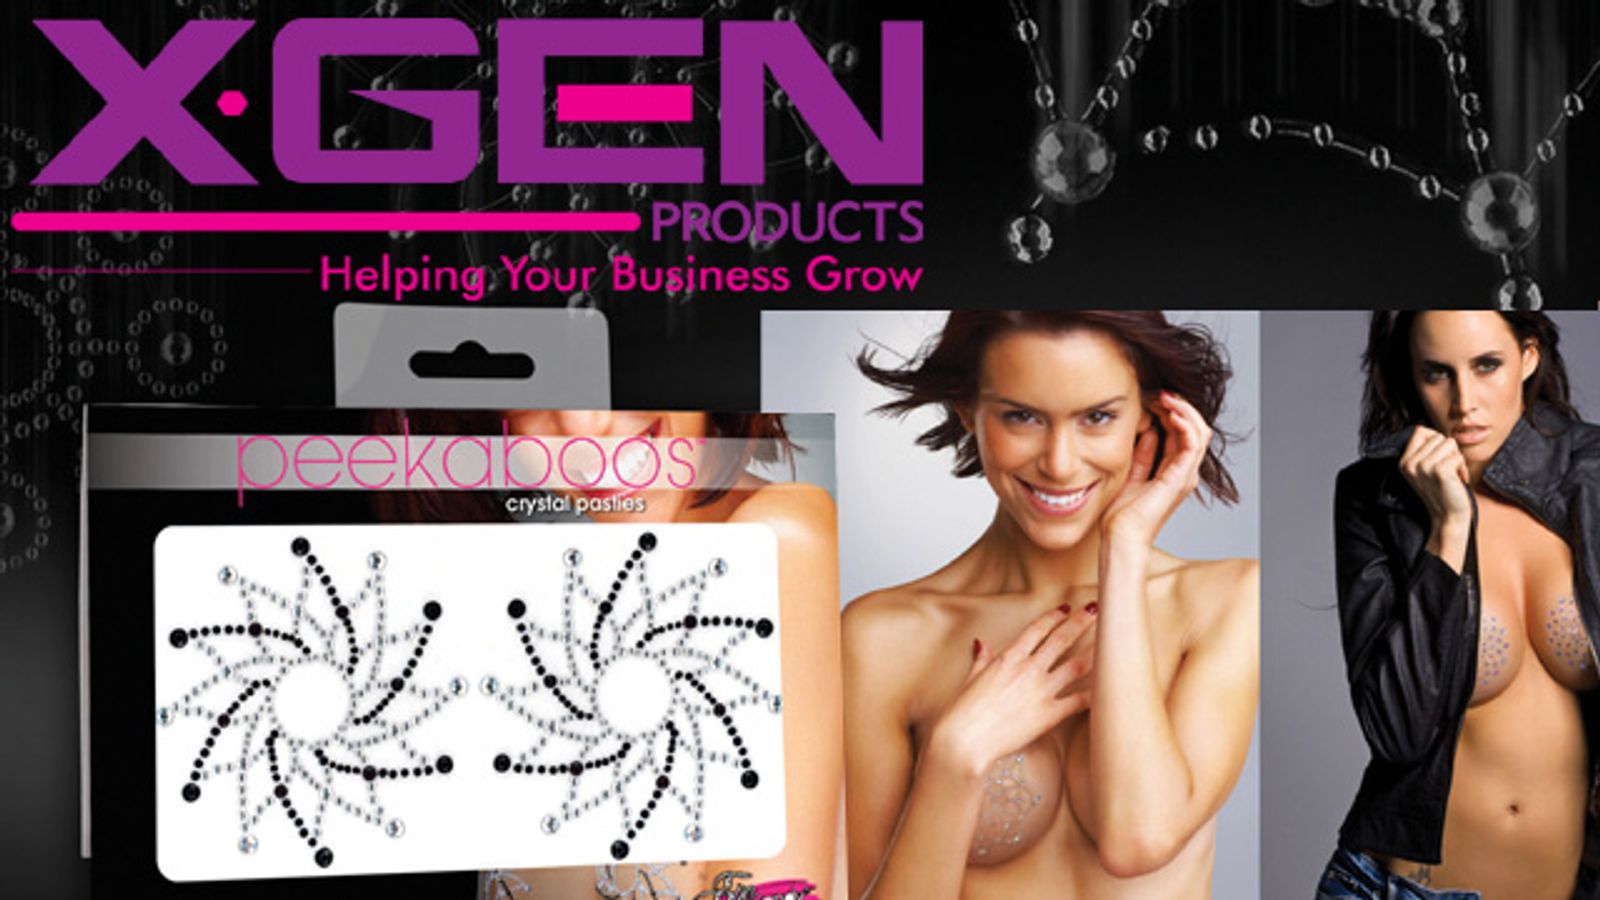 Xgen Brings Bling With New Crystal Pasties